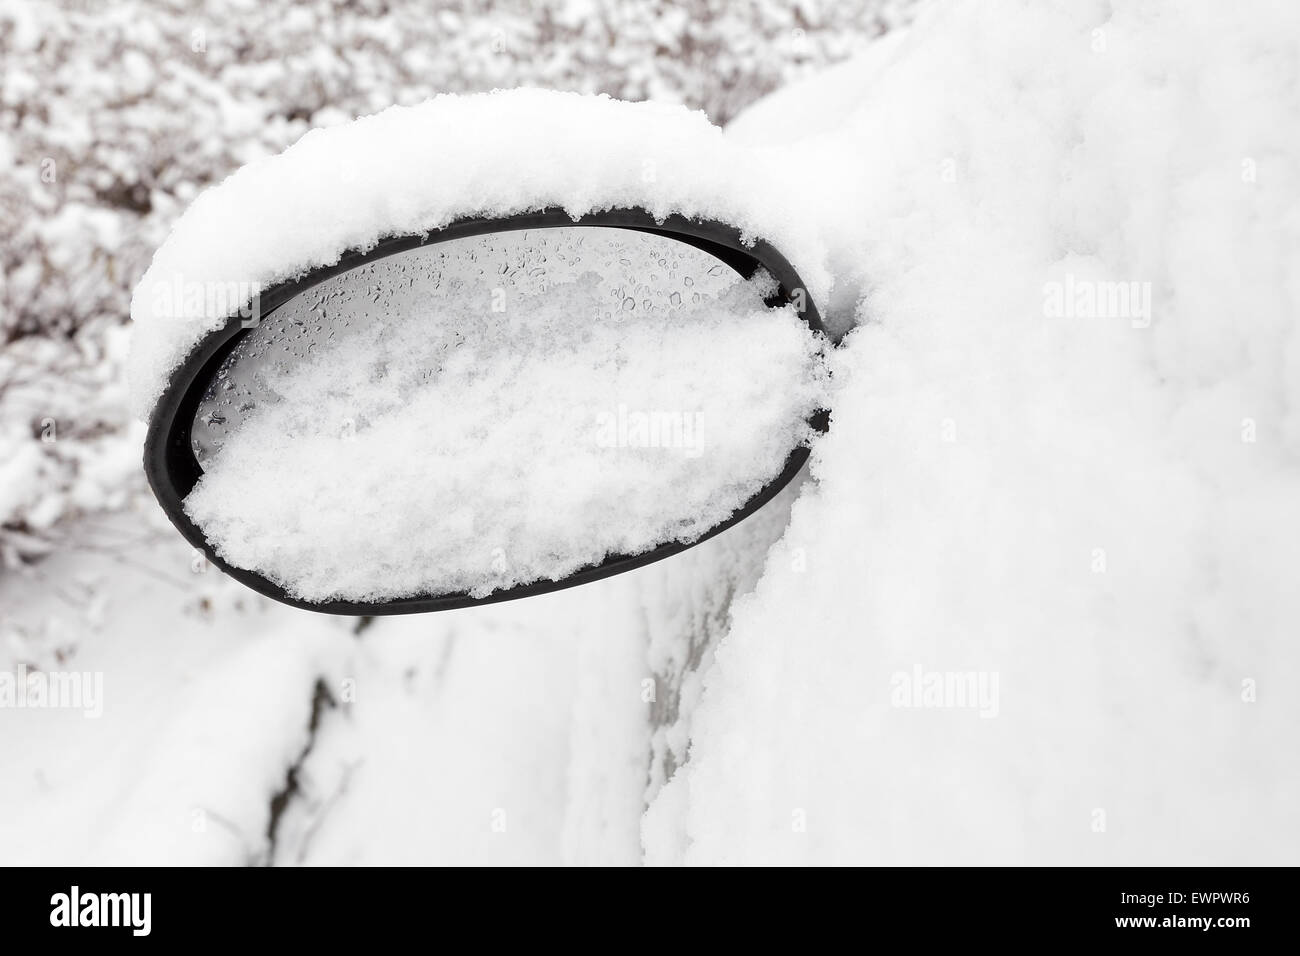 Car mirror filled with snow in winter season Stock Photo